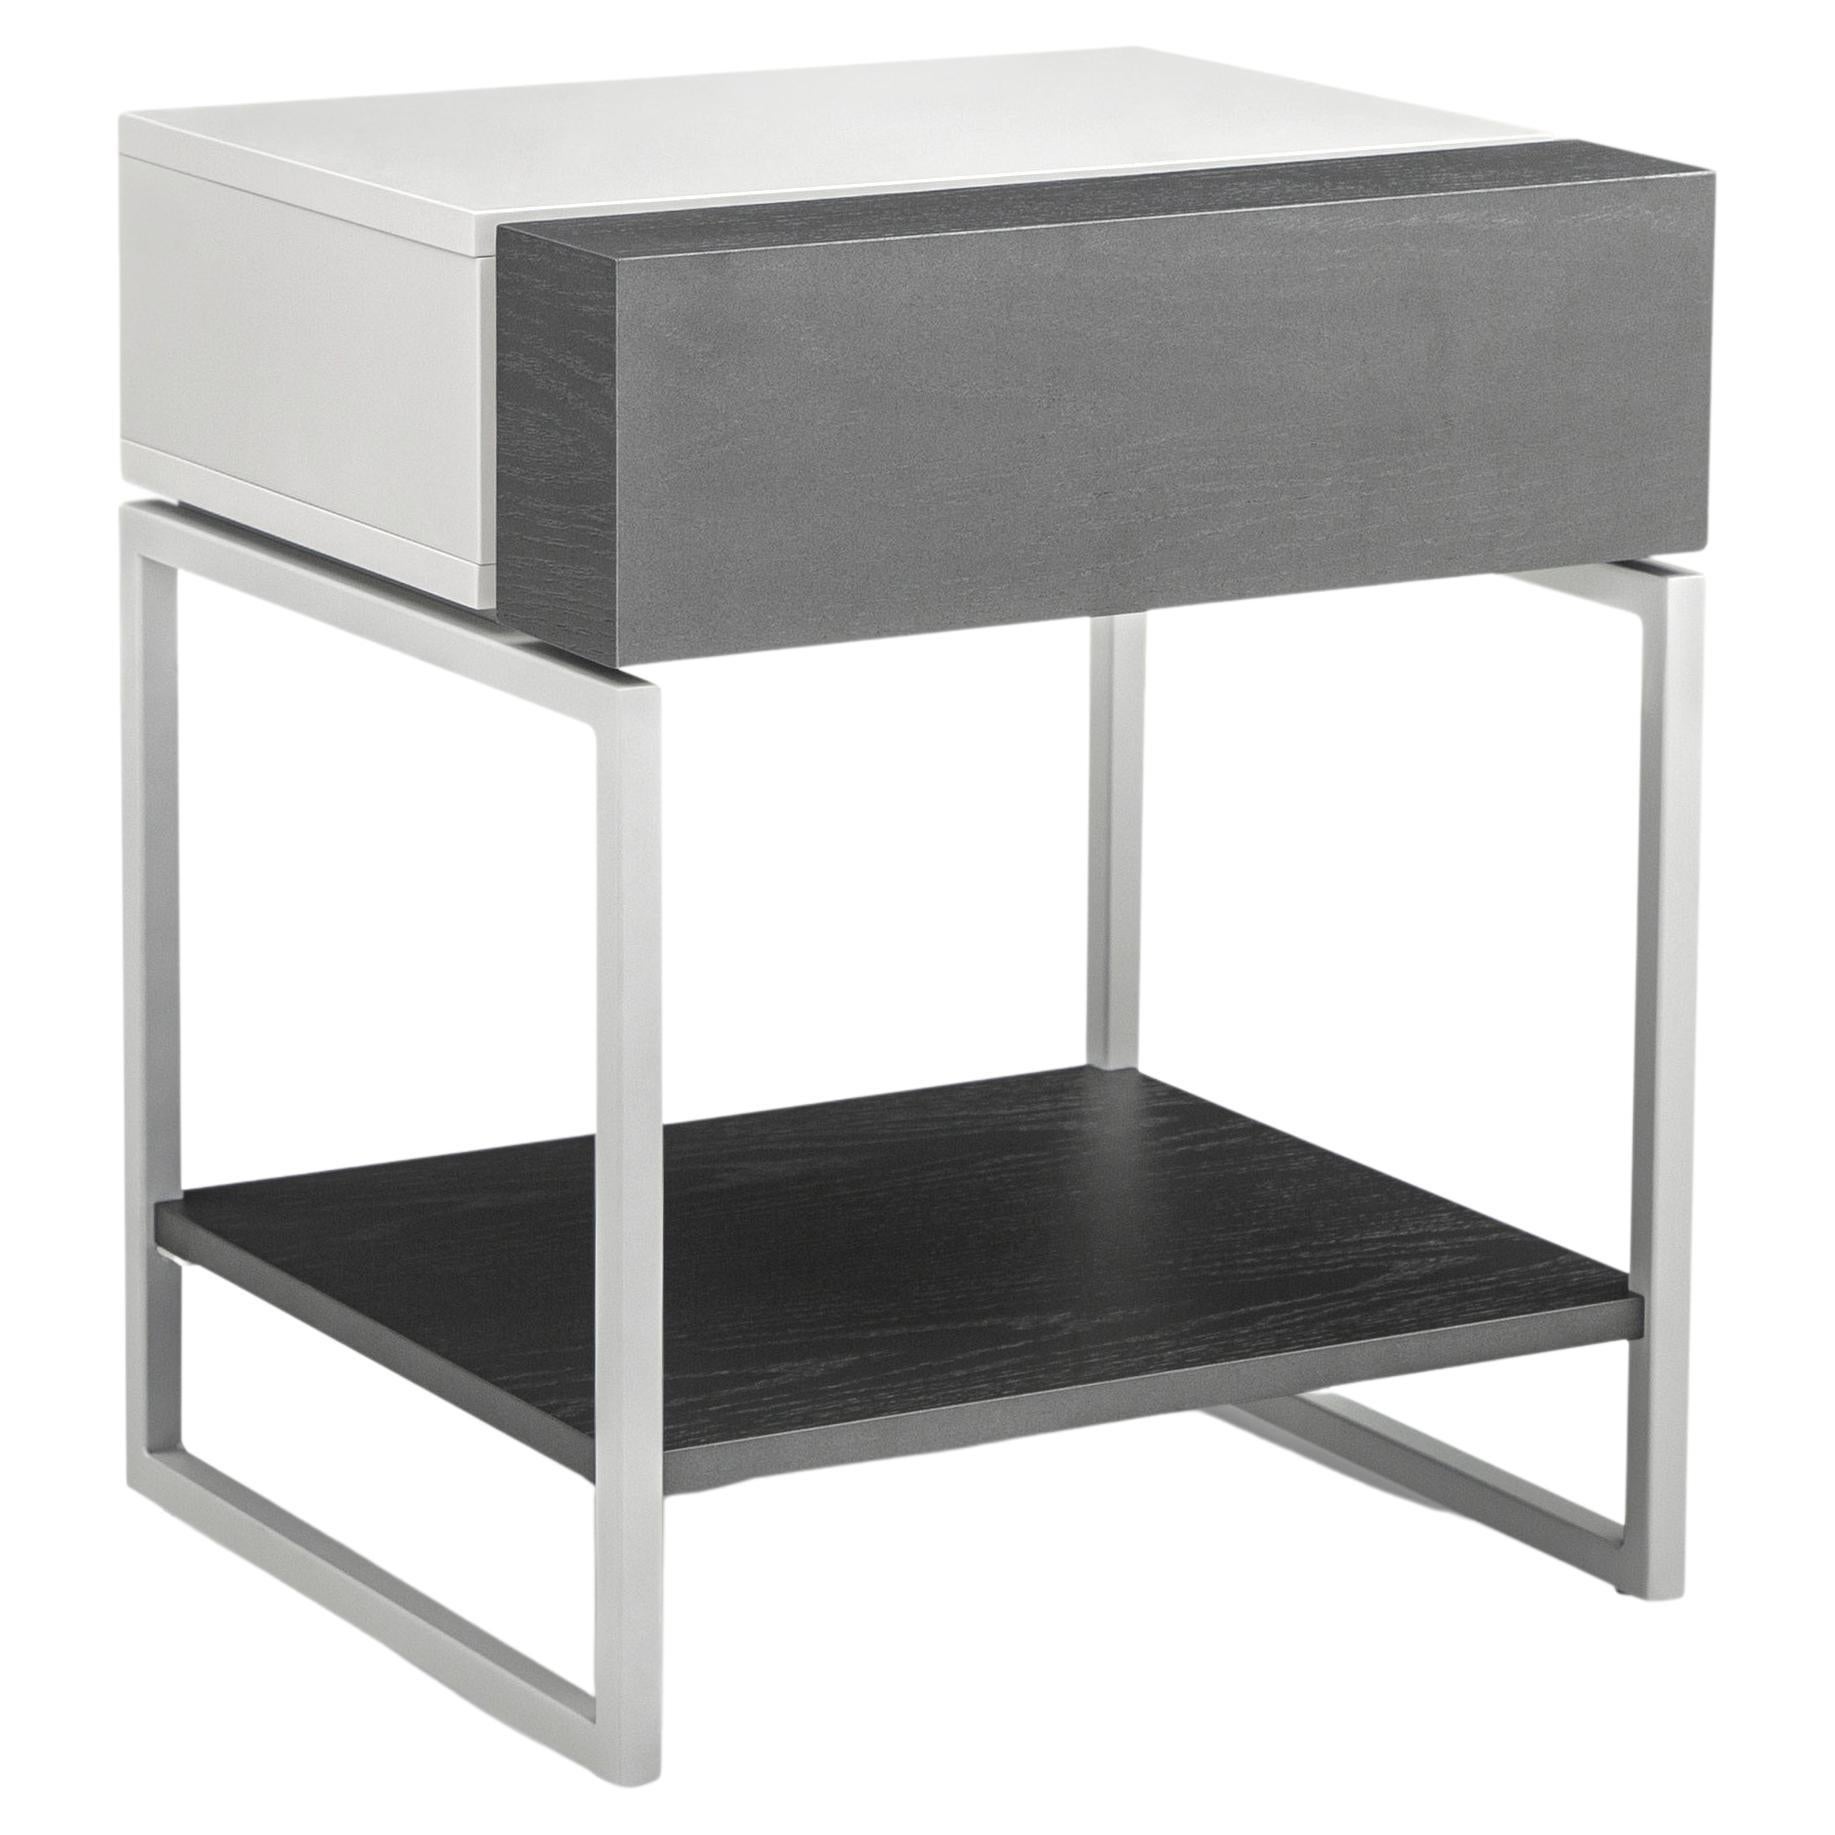 Tallo Nightstand with a Gray Oak Drawer and Off-White Frame For Sale